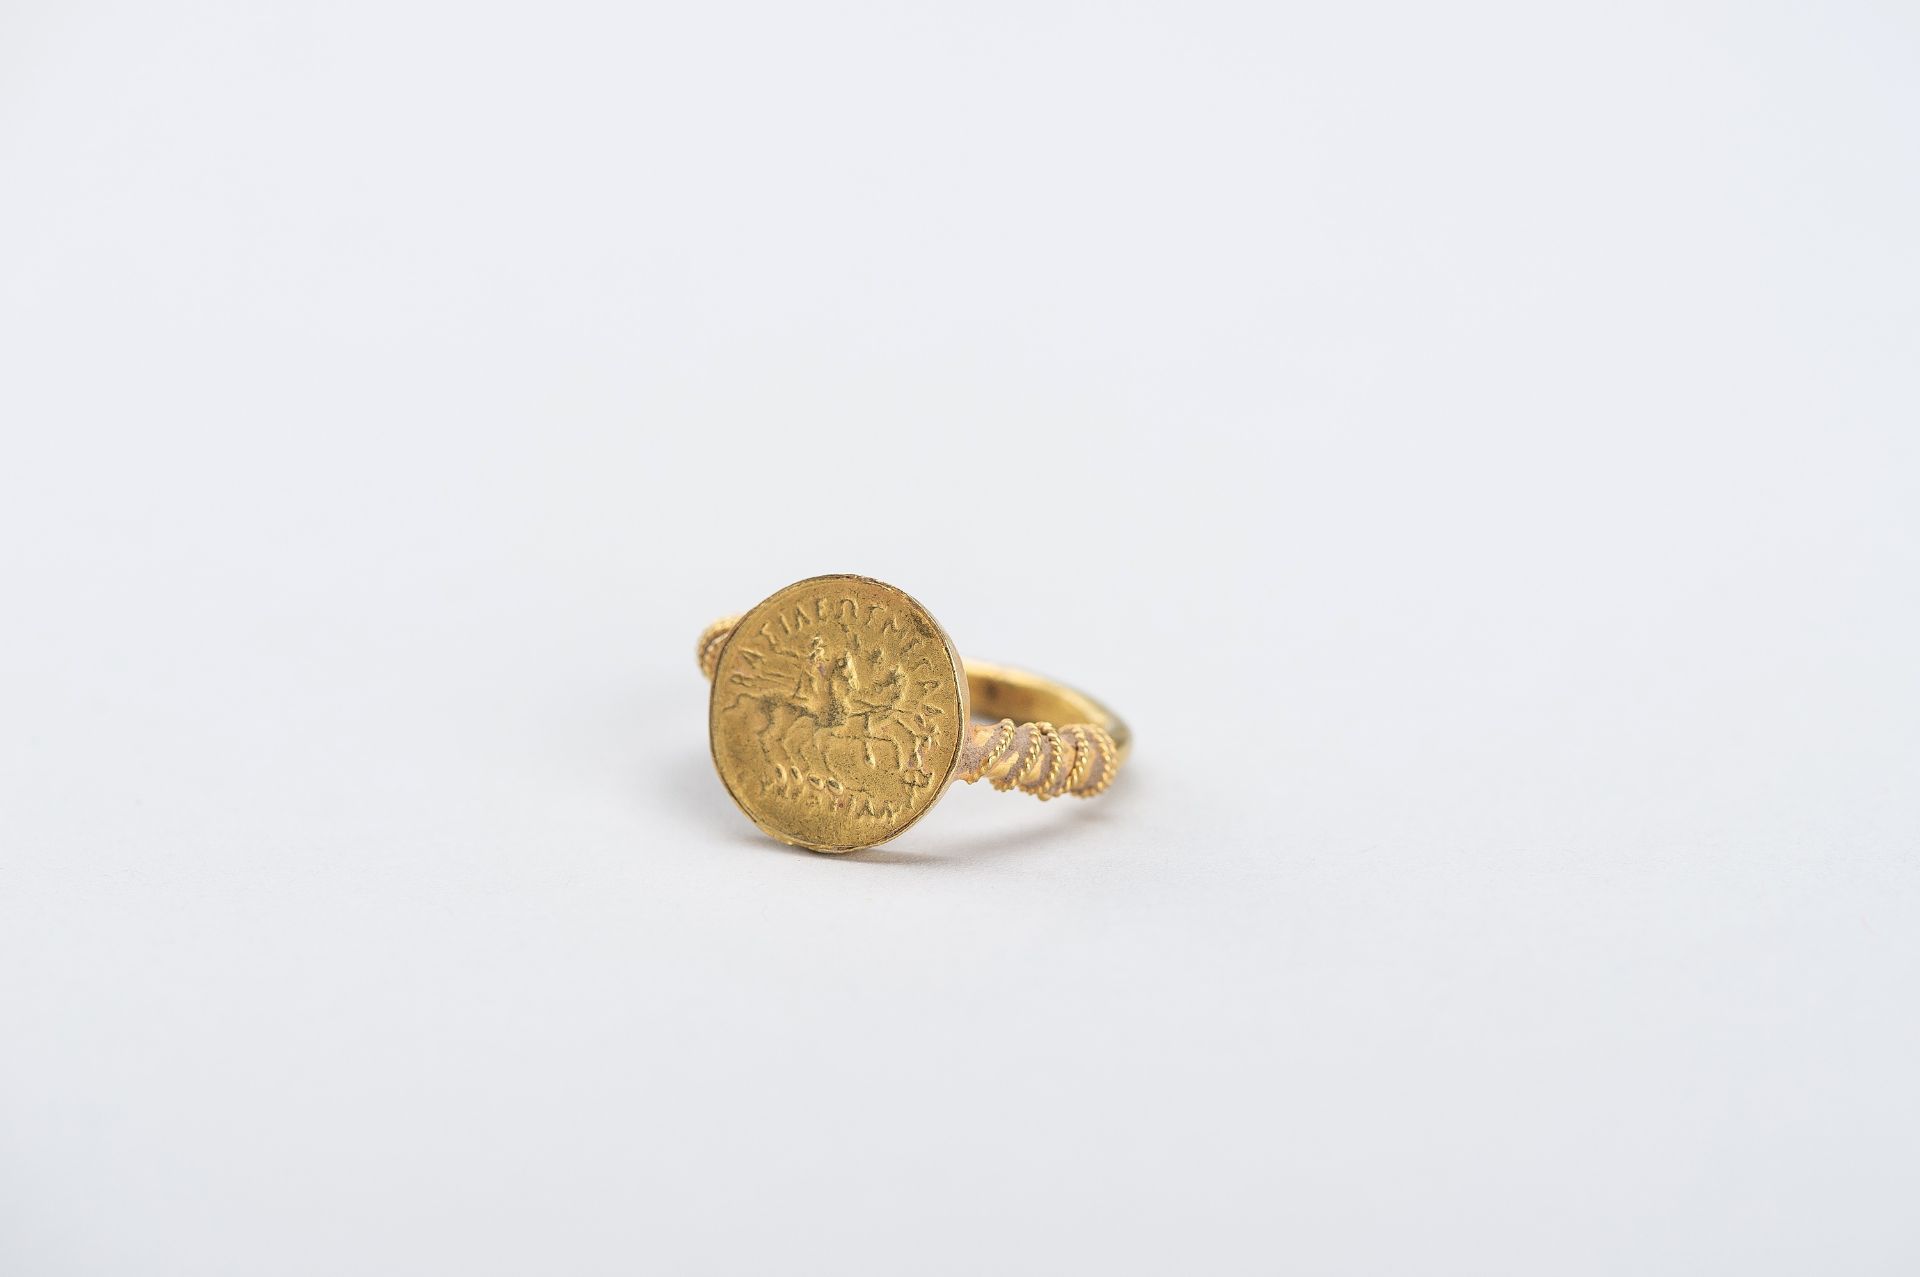 A BACTRIAN GOLD COIN RING - Image 7 of 11